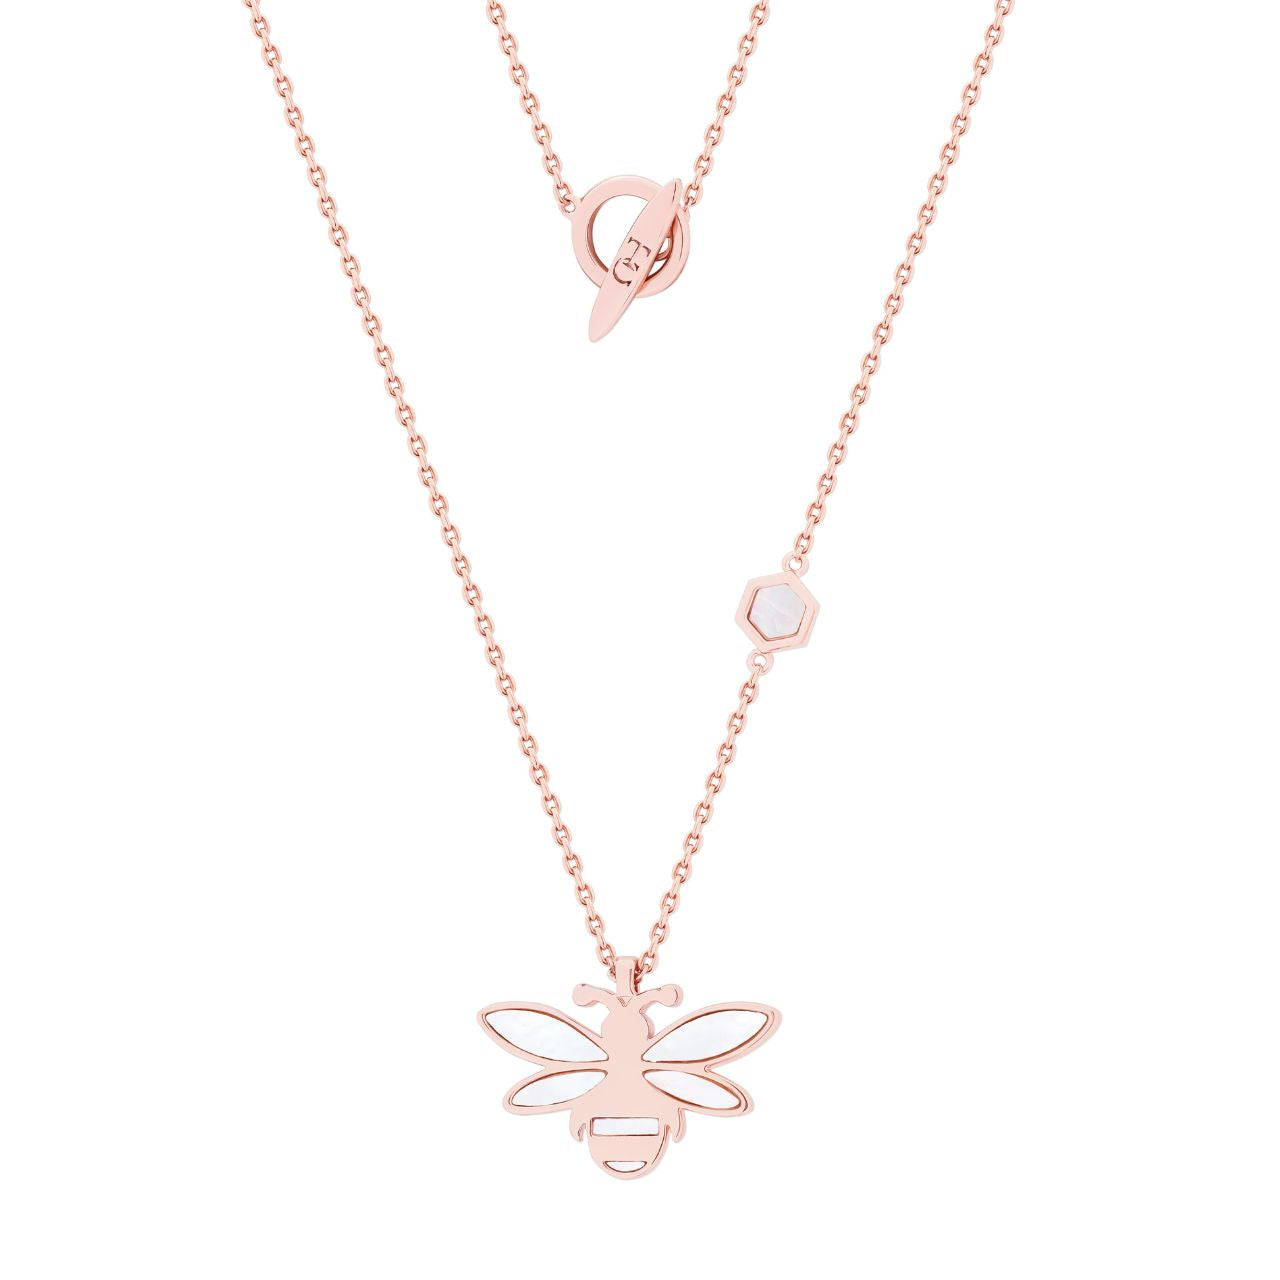 Bee Rose Gold Mother of Pearl Cut Out Pendant - New Winter 2022   Chain Length: 800 mm long chain  Pendant Dimensions: 24*15 mm